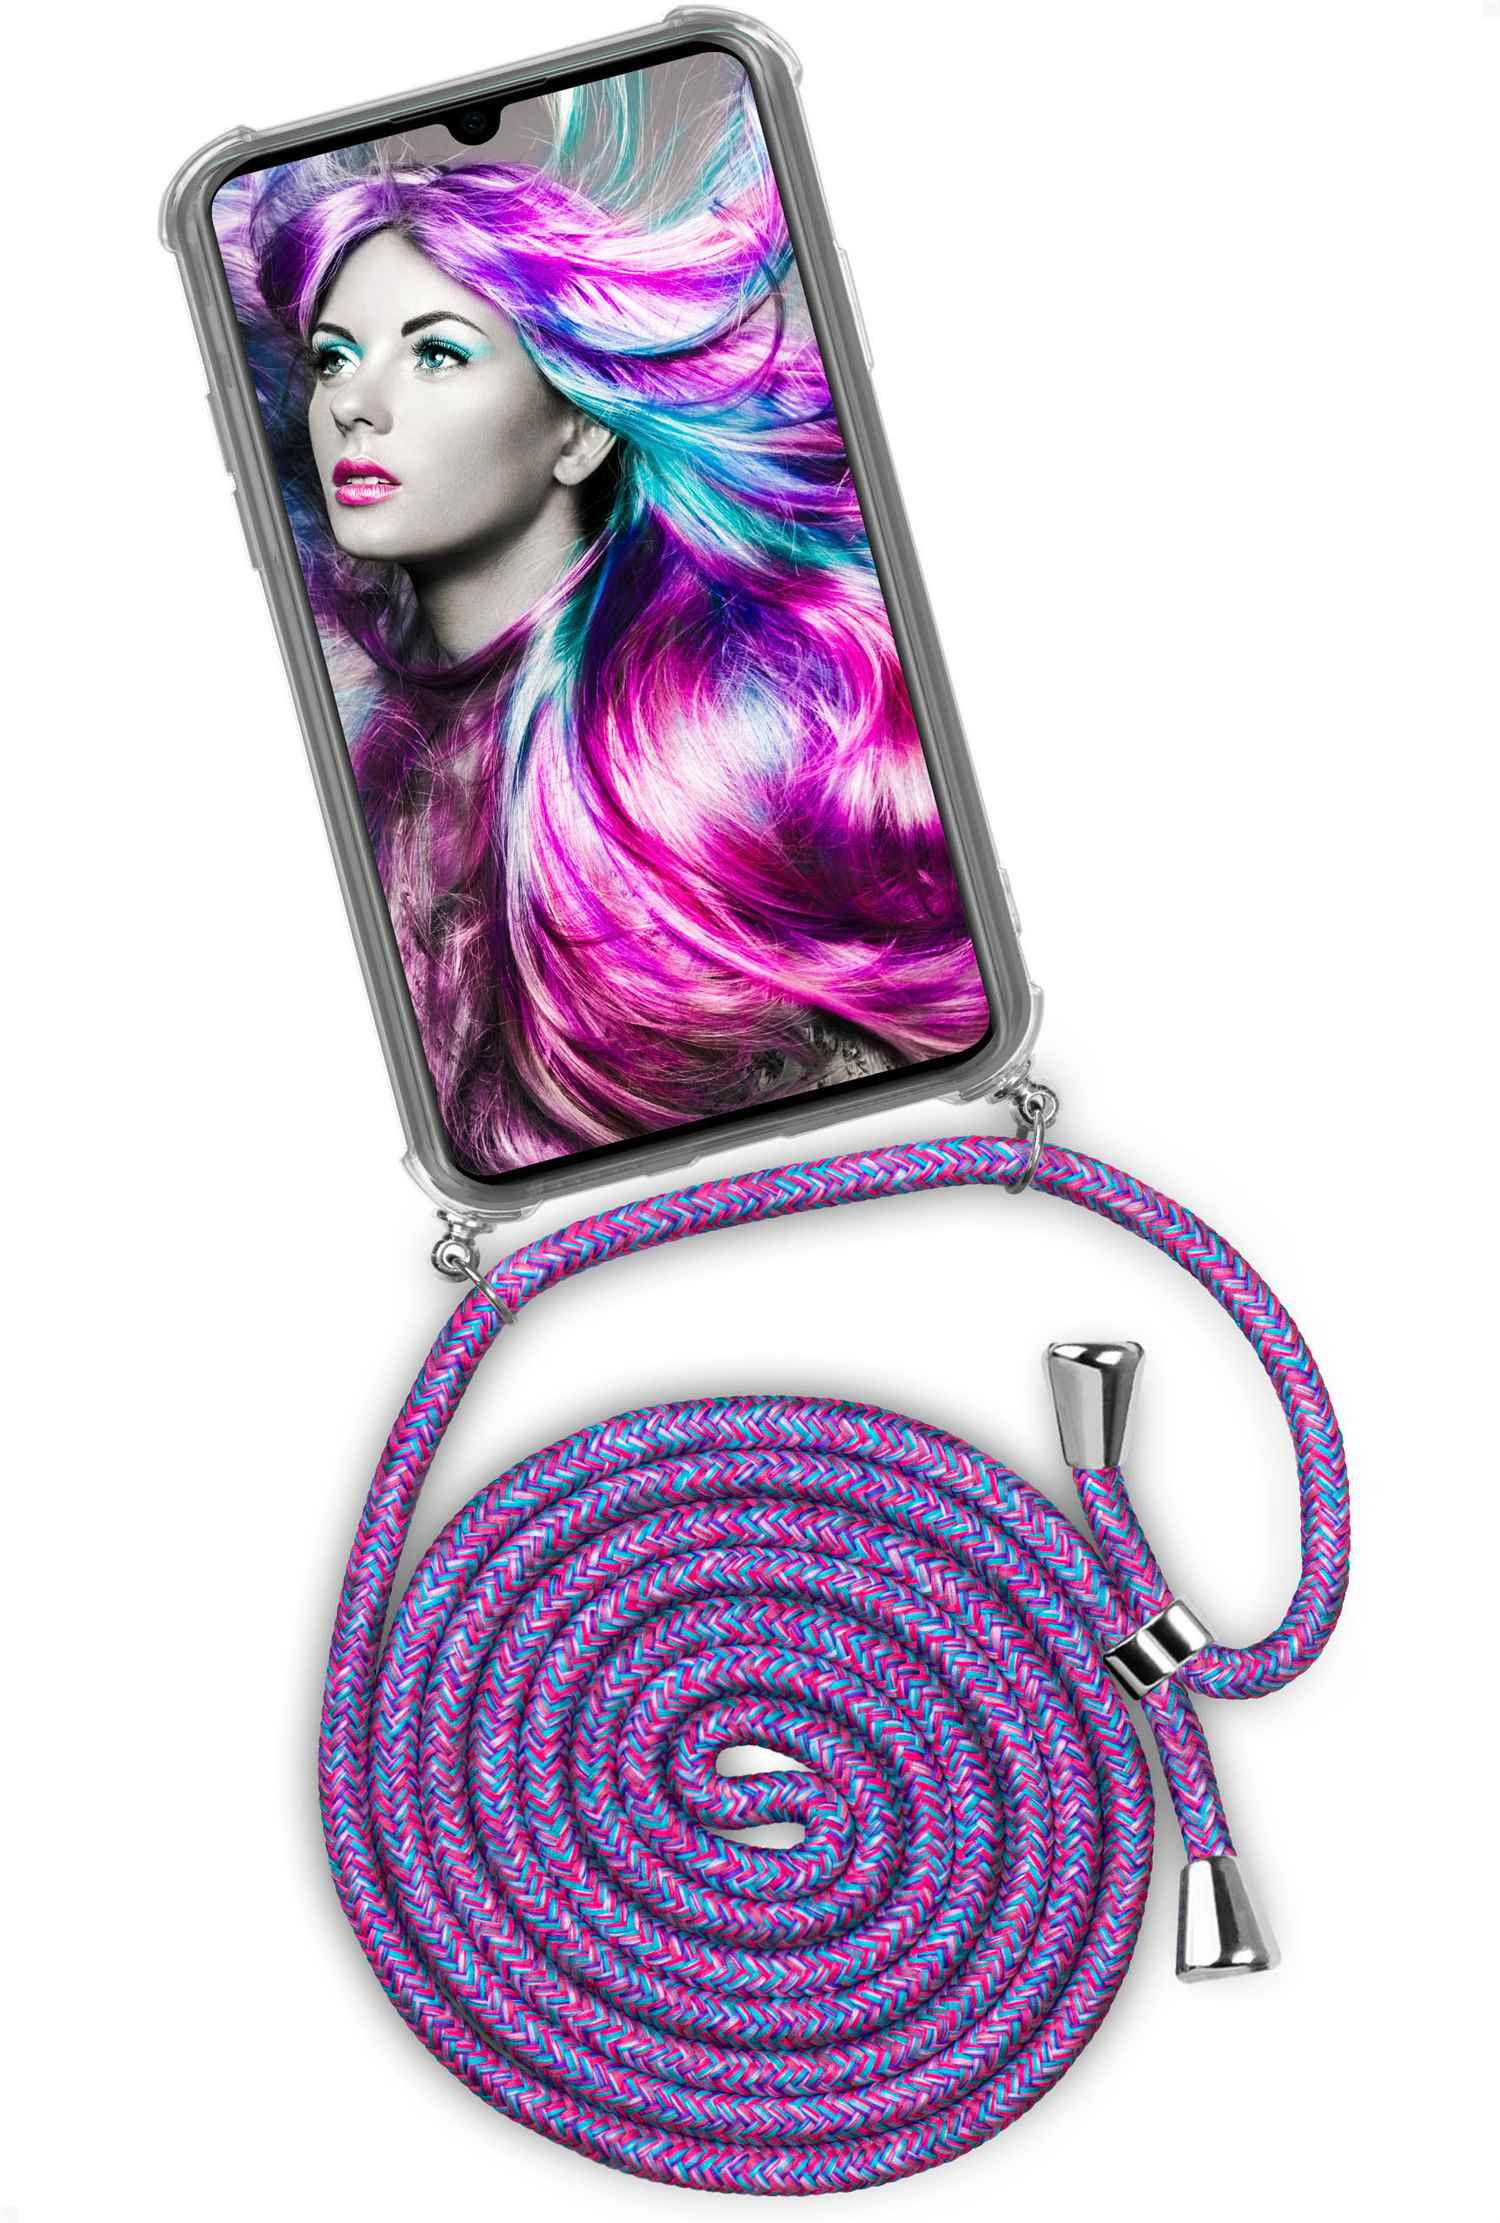 Unicorn Twist Backcover, Pro, (Silber) Crazy ONEFLOW P30 Huawei, Case,